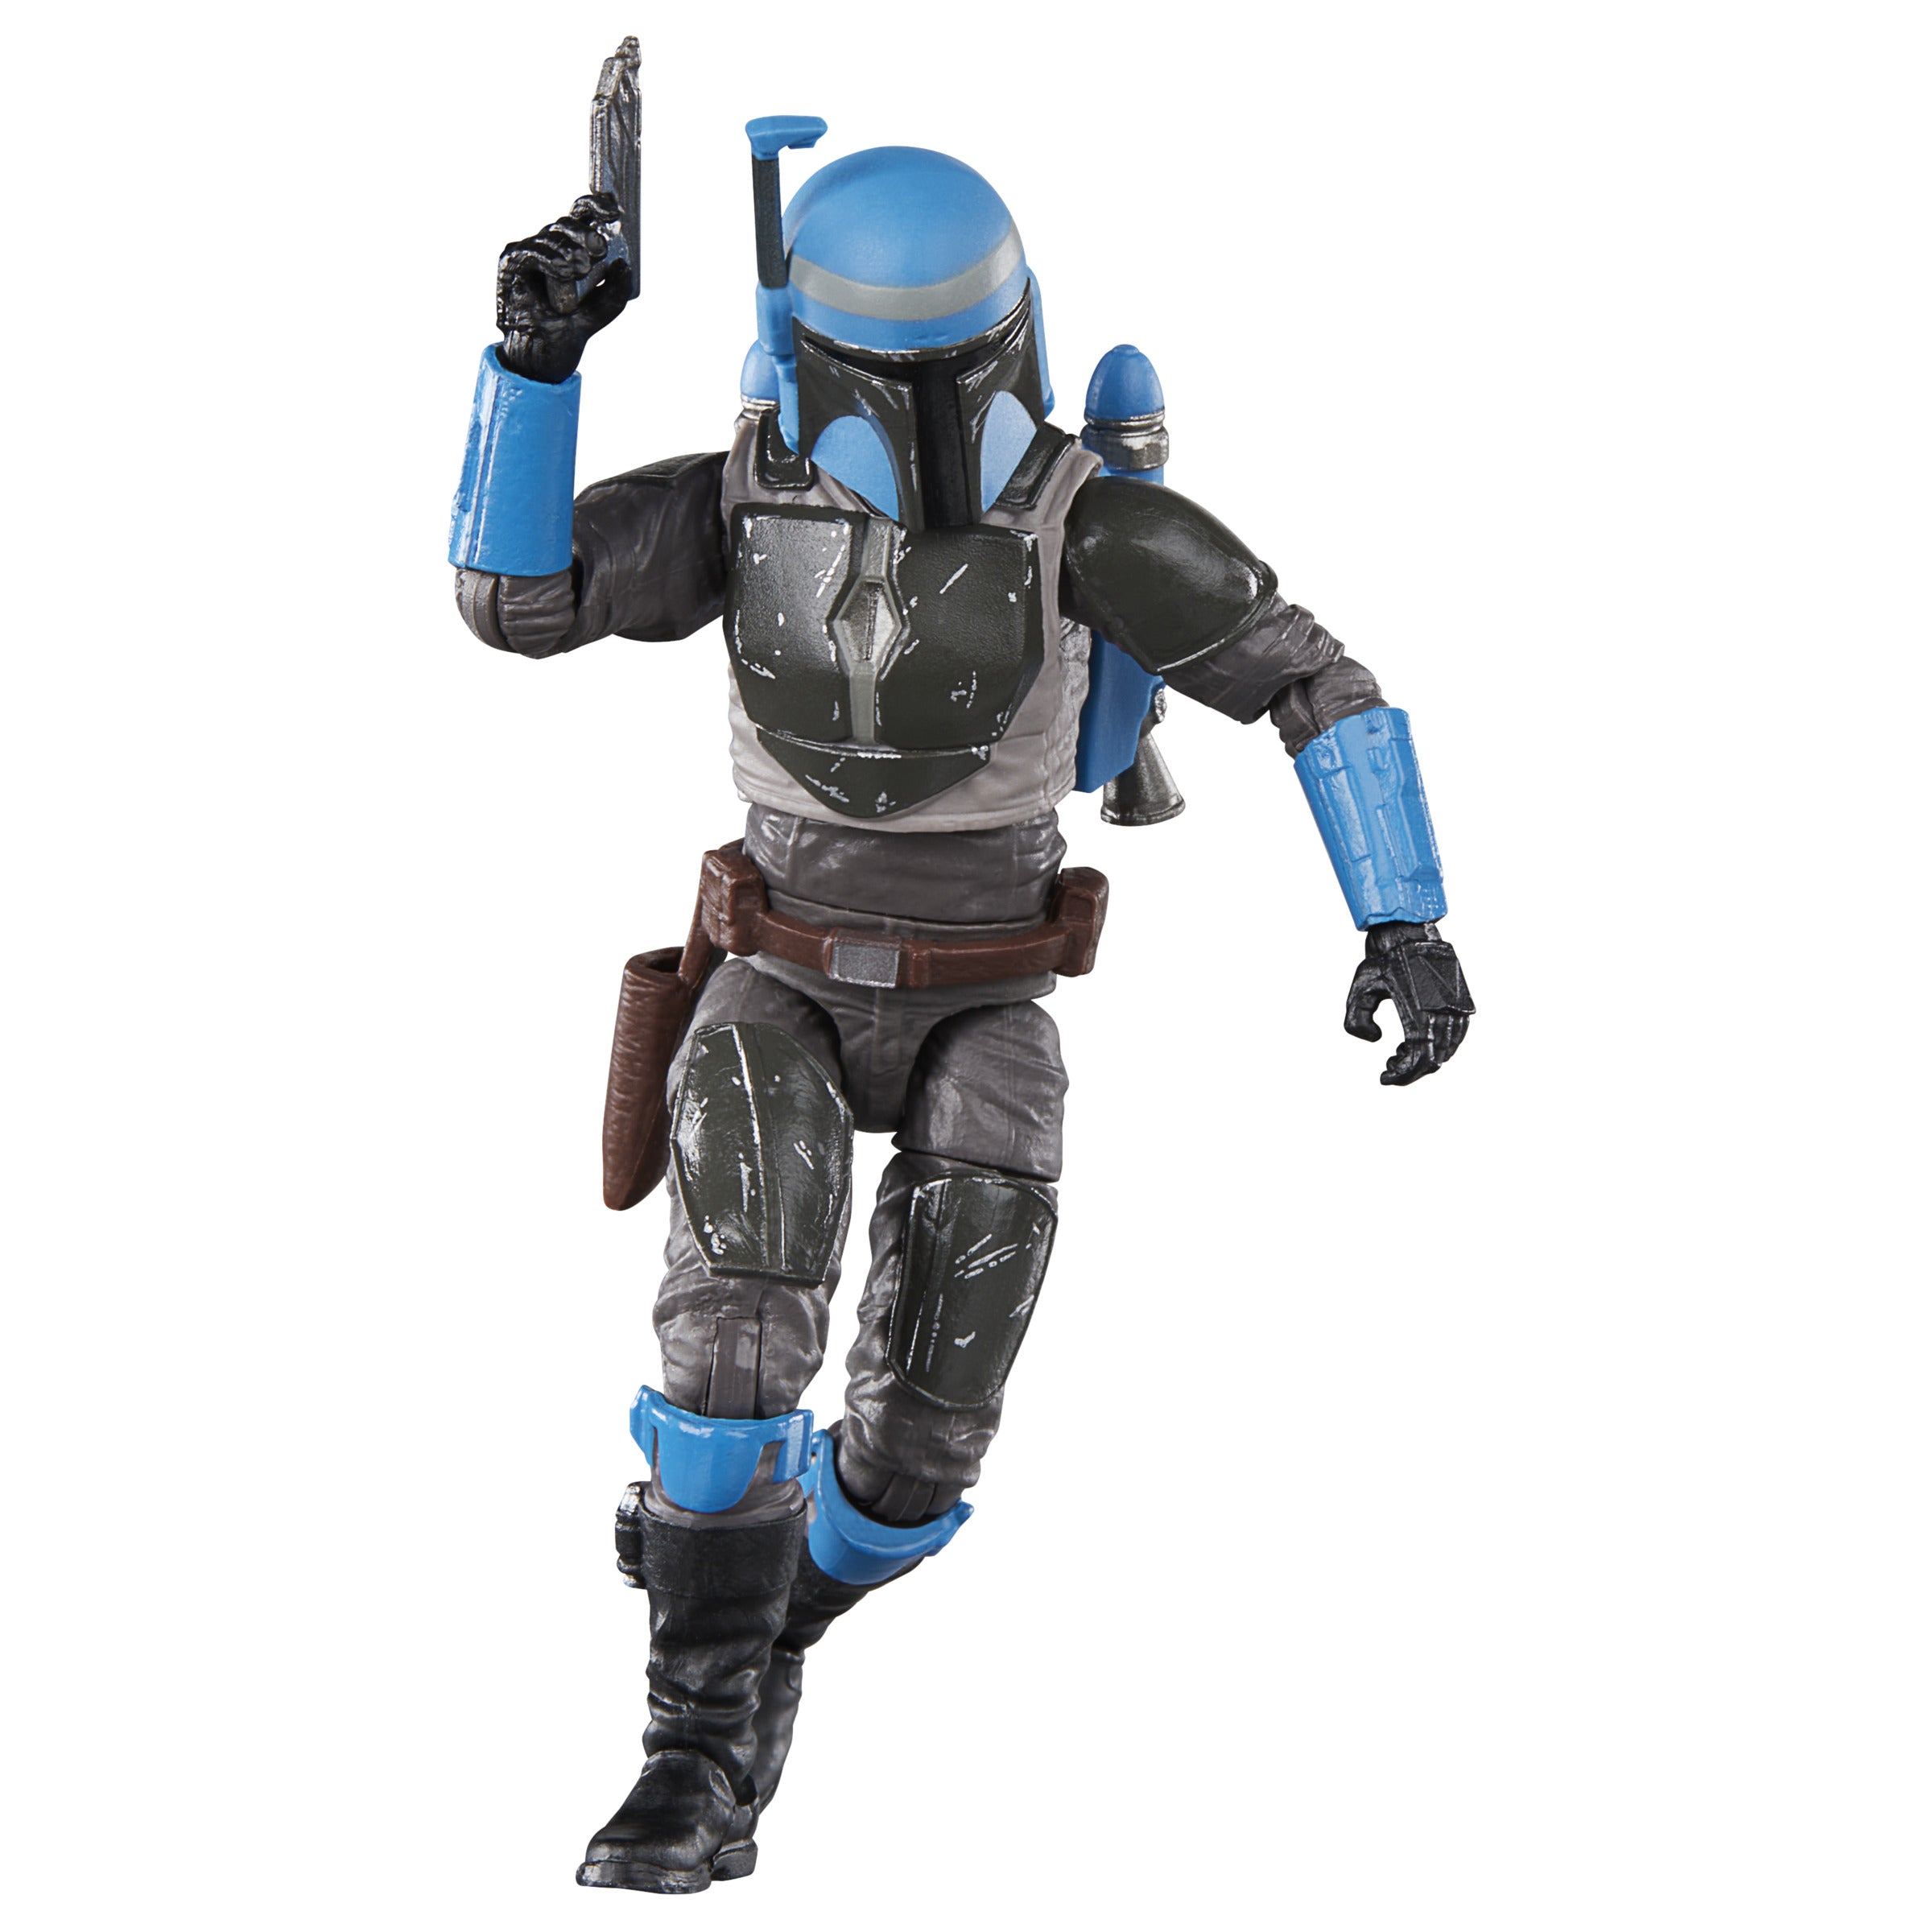 Star Wars The Vintage Collection: The Mandalorian - Axe Woves Privateer